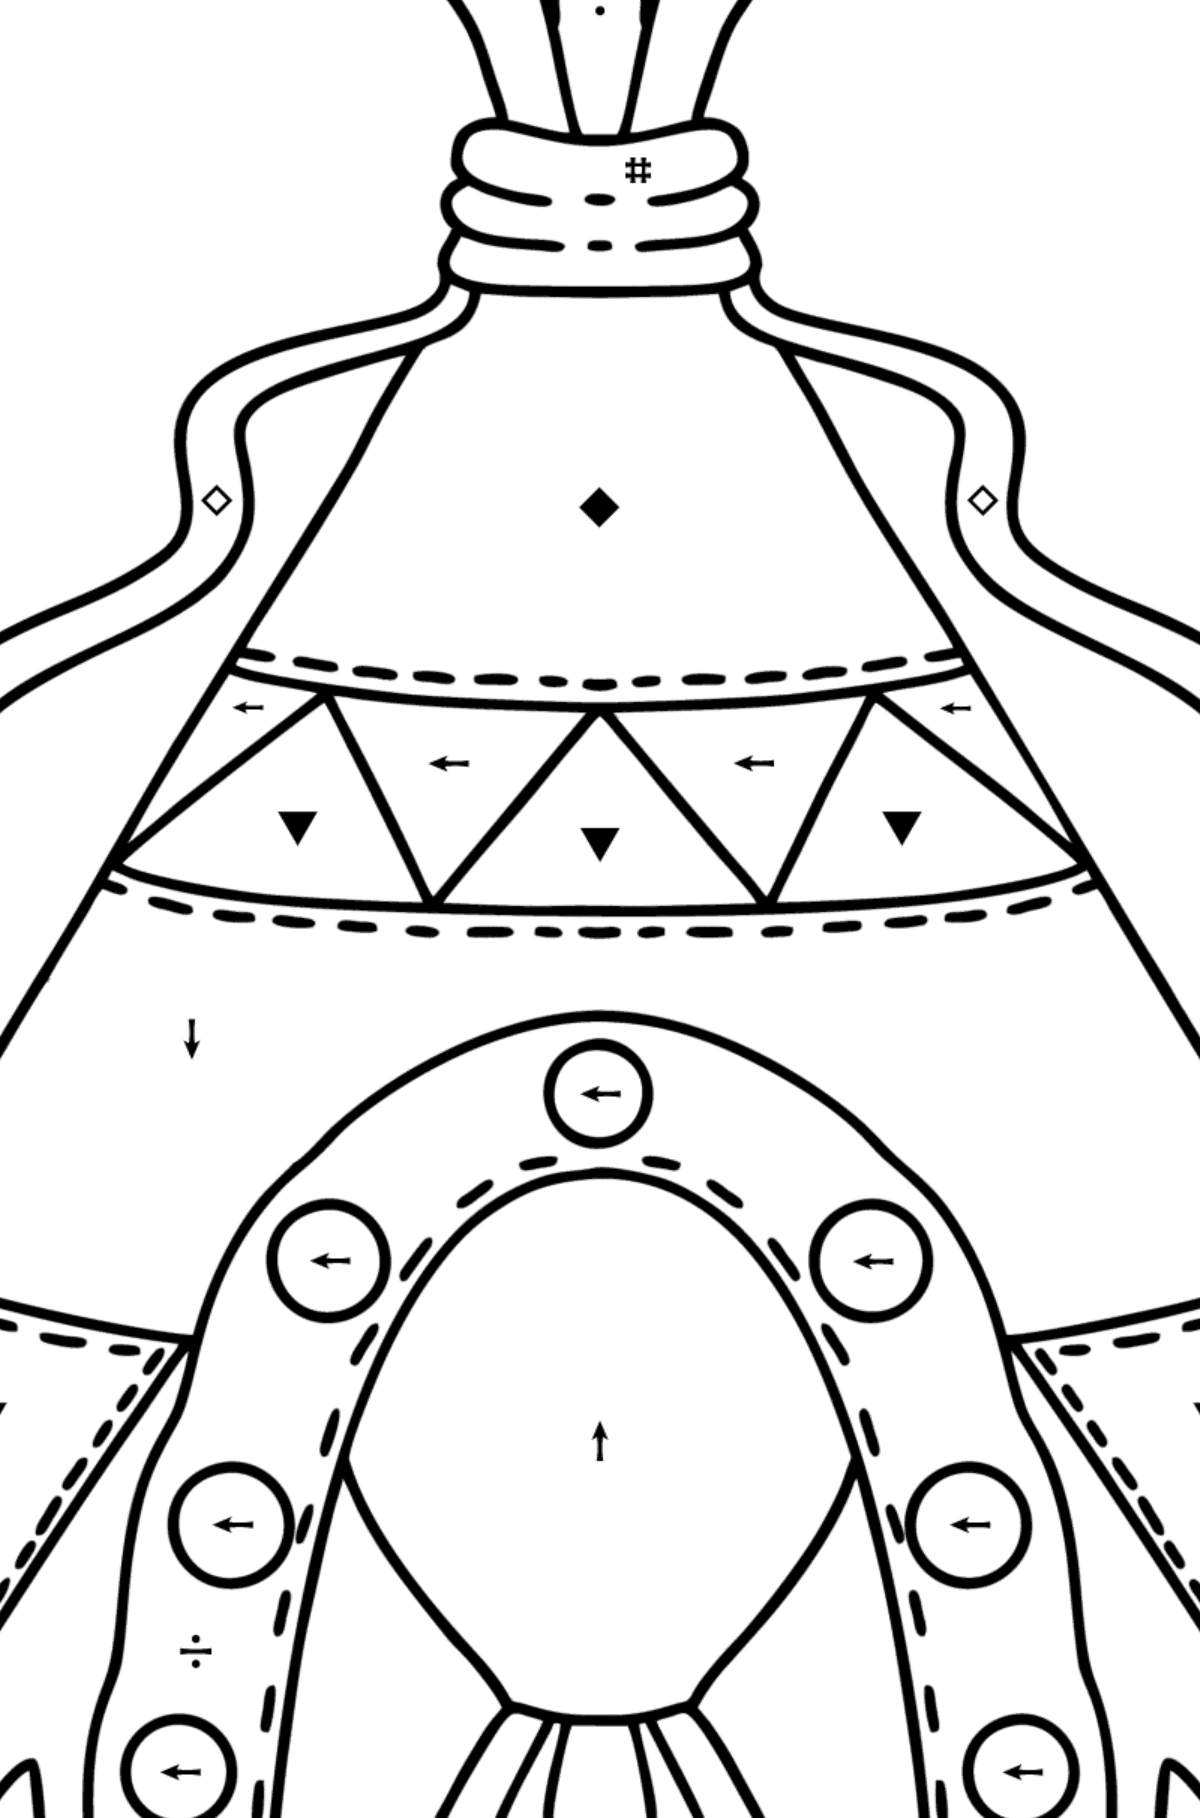 Tepee coloring page - Coloring by Symbols for Kids